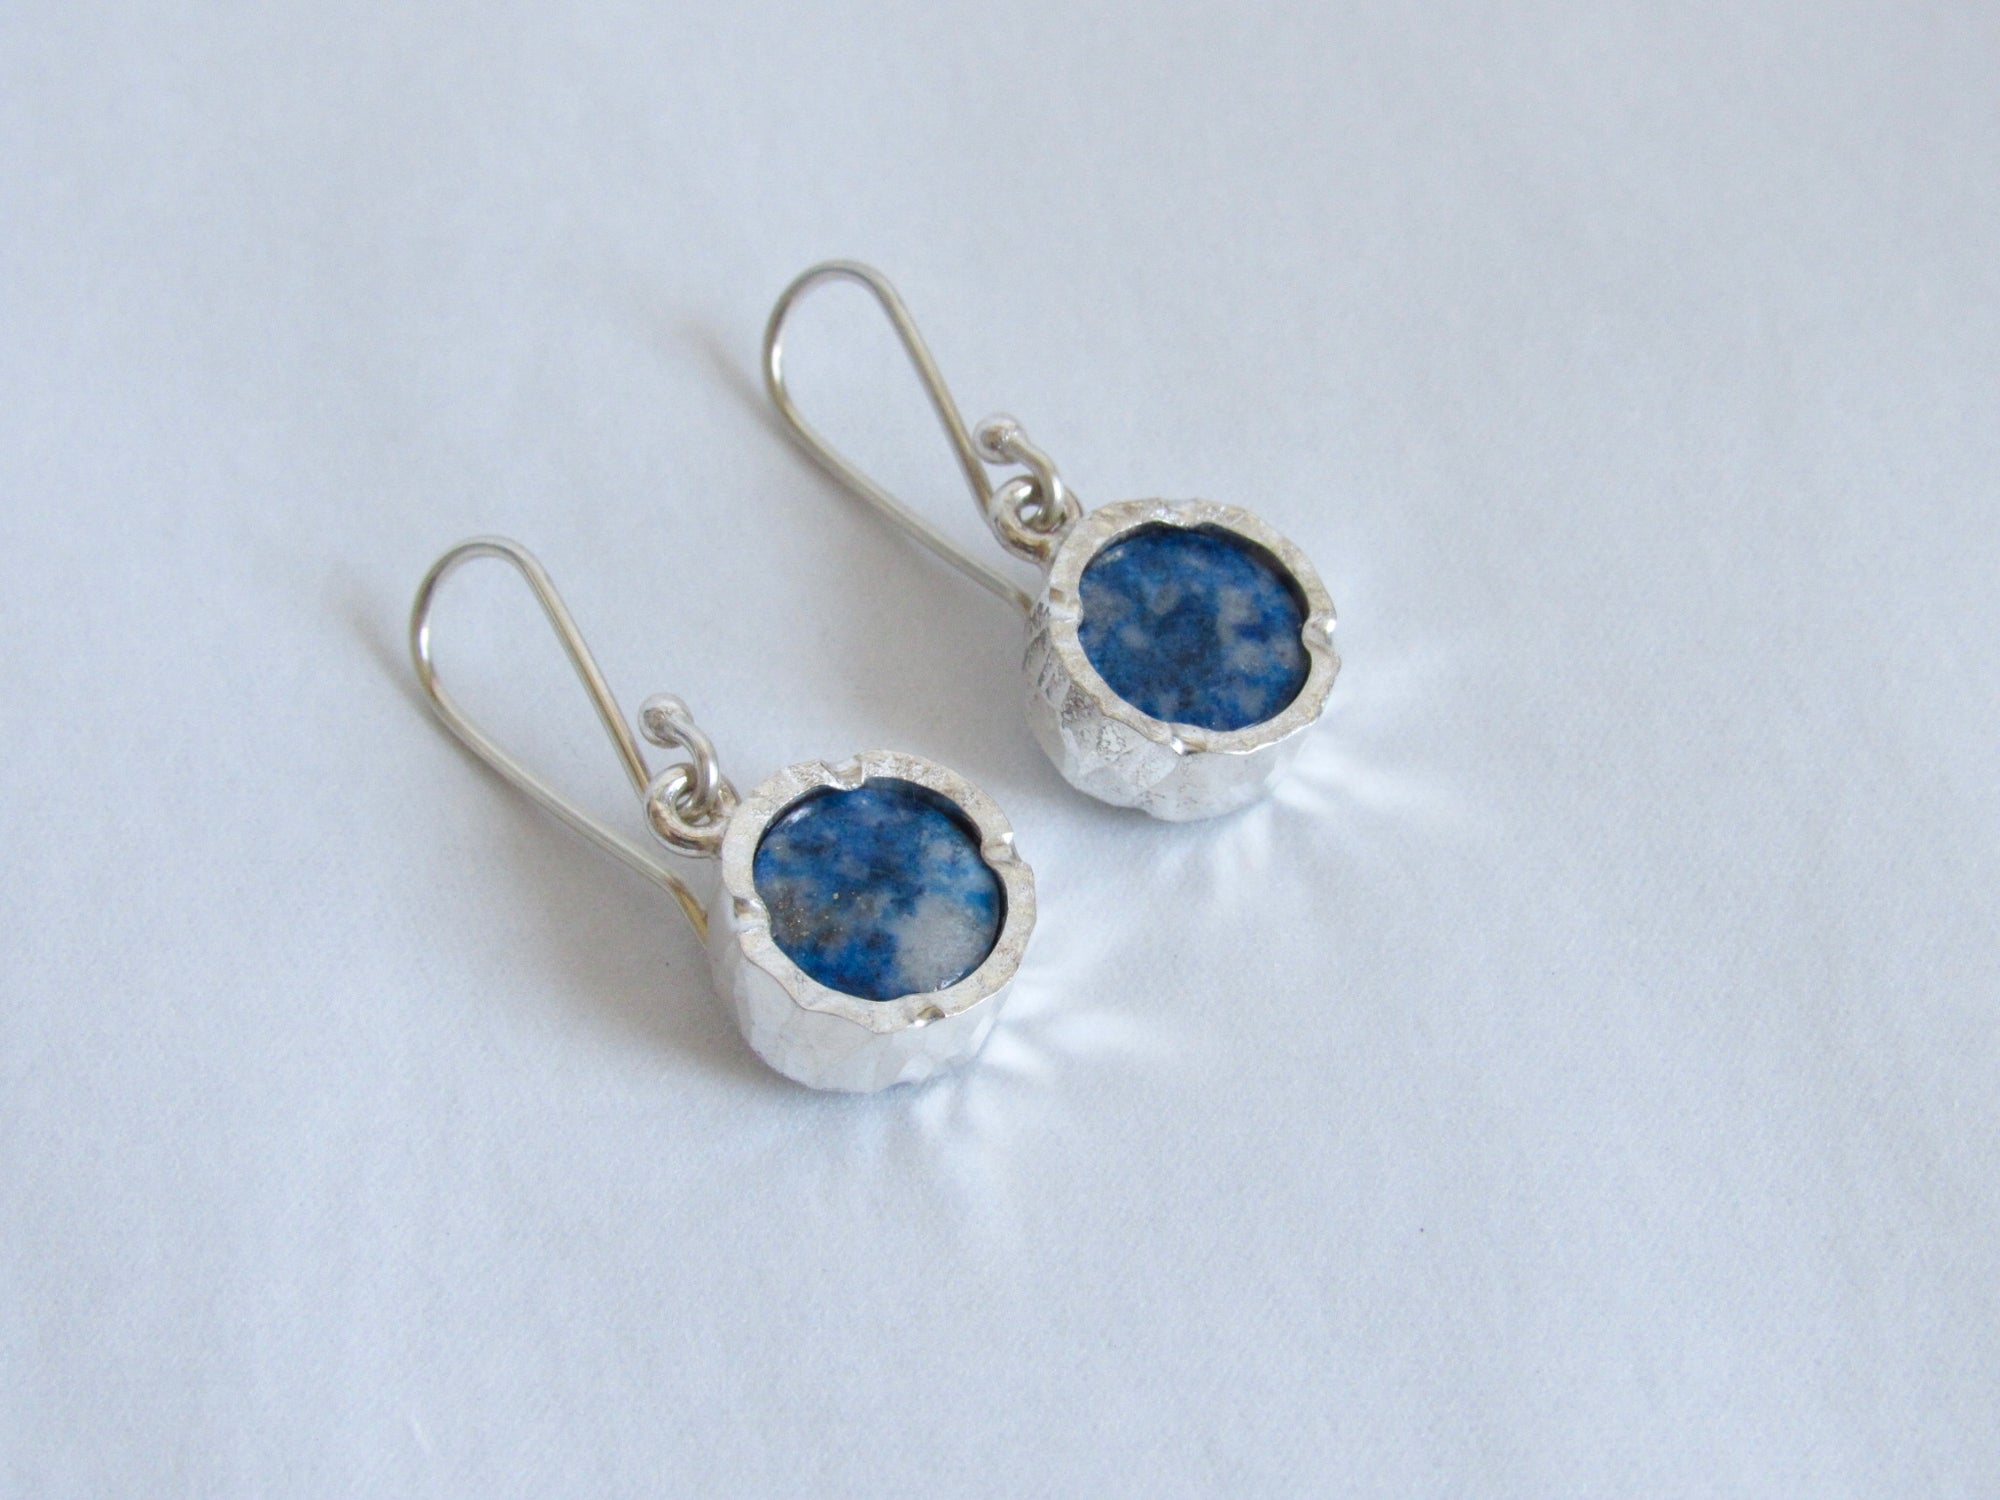 Earrings - Lapis and Sterling Silver drops